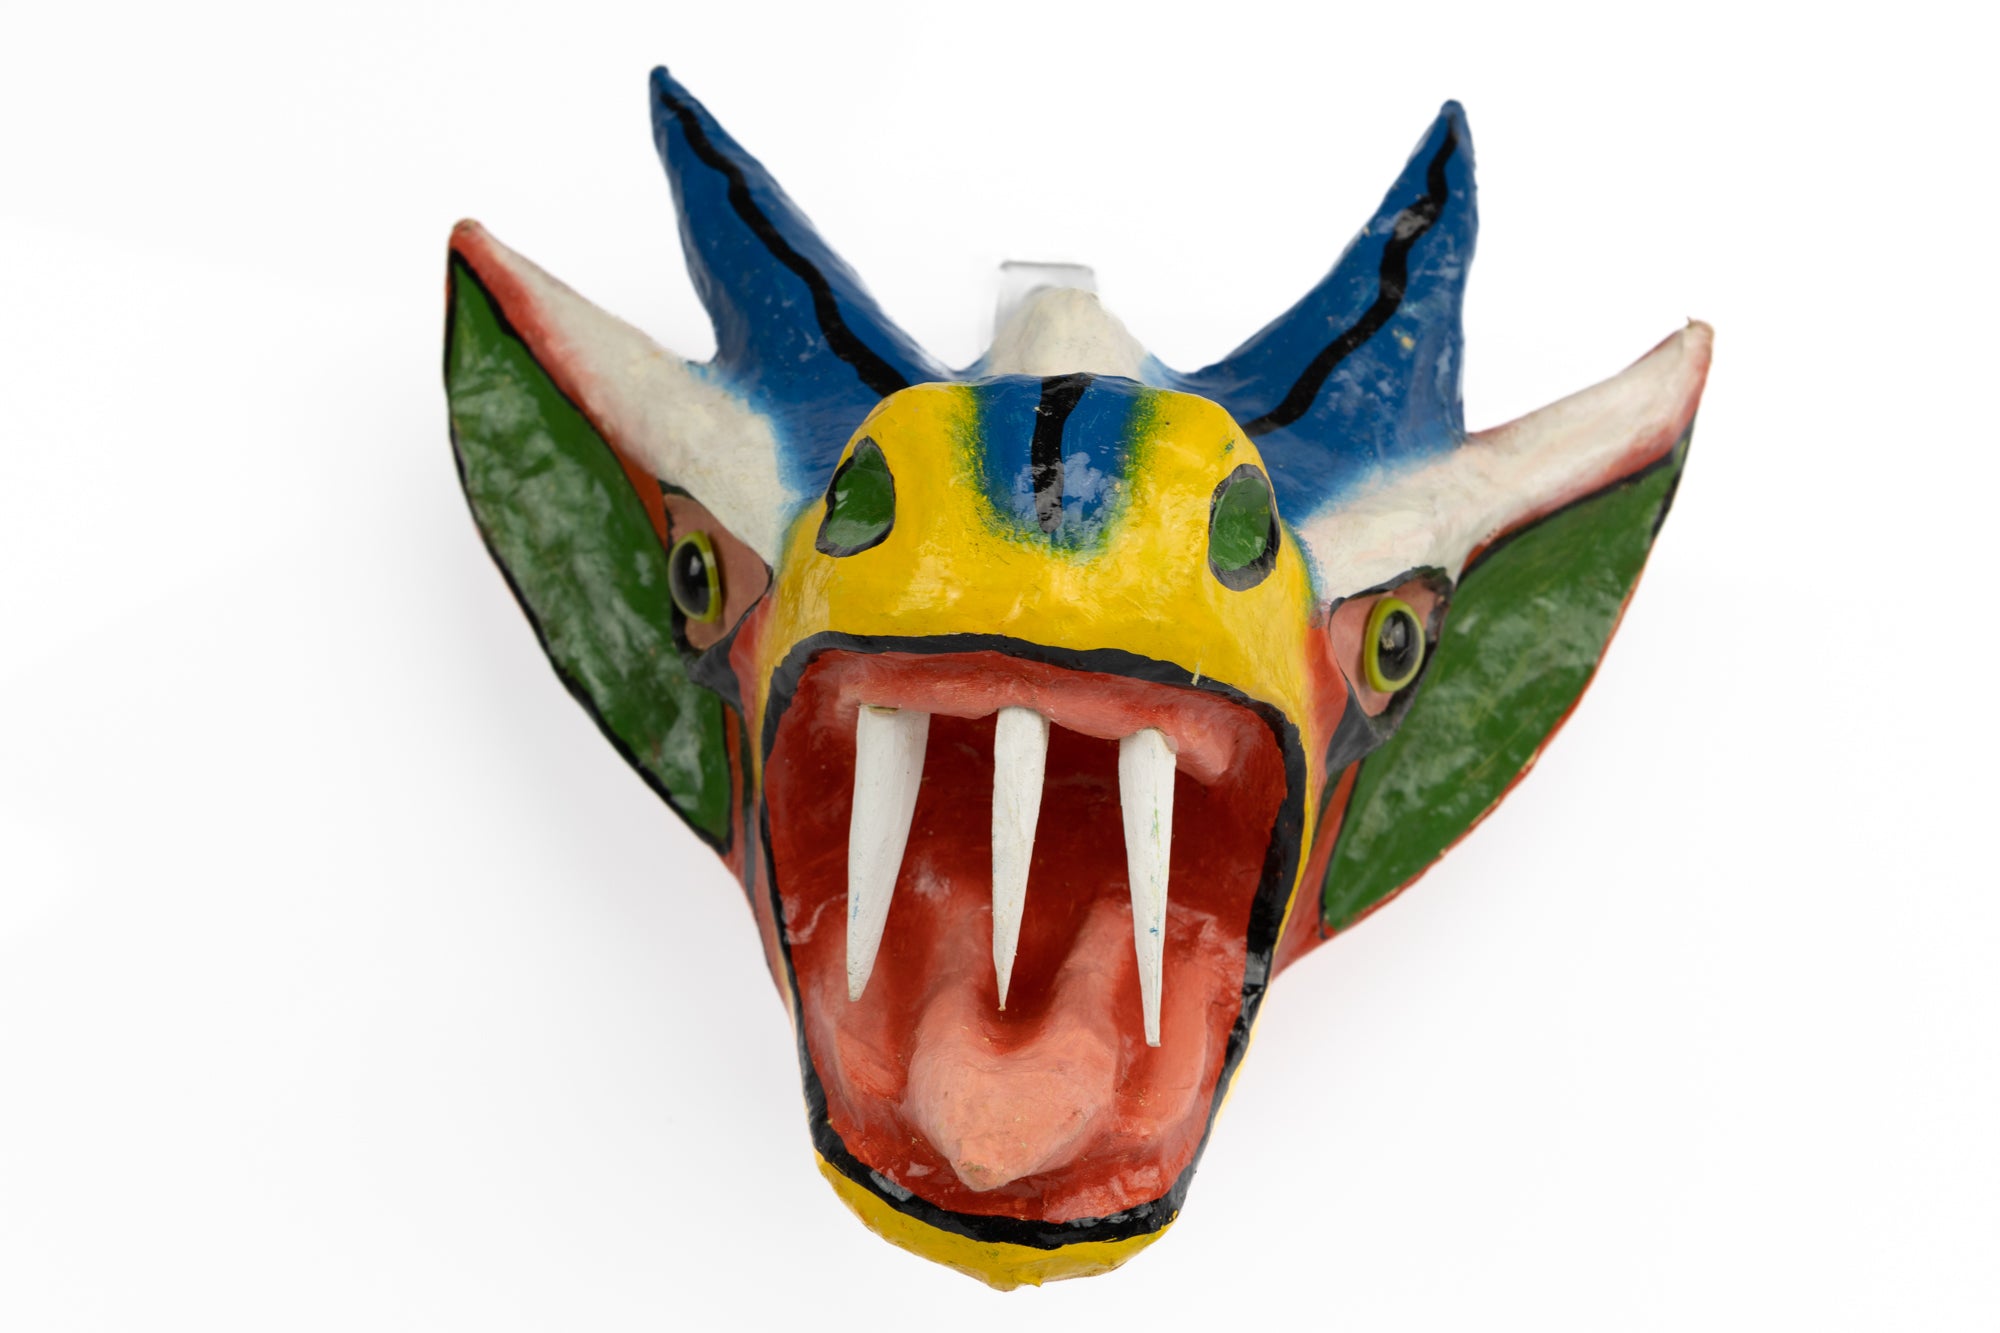 Blue Horns Green and White Ears Paper Mache Mask